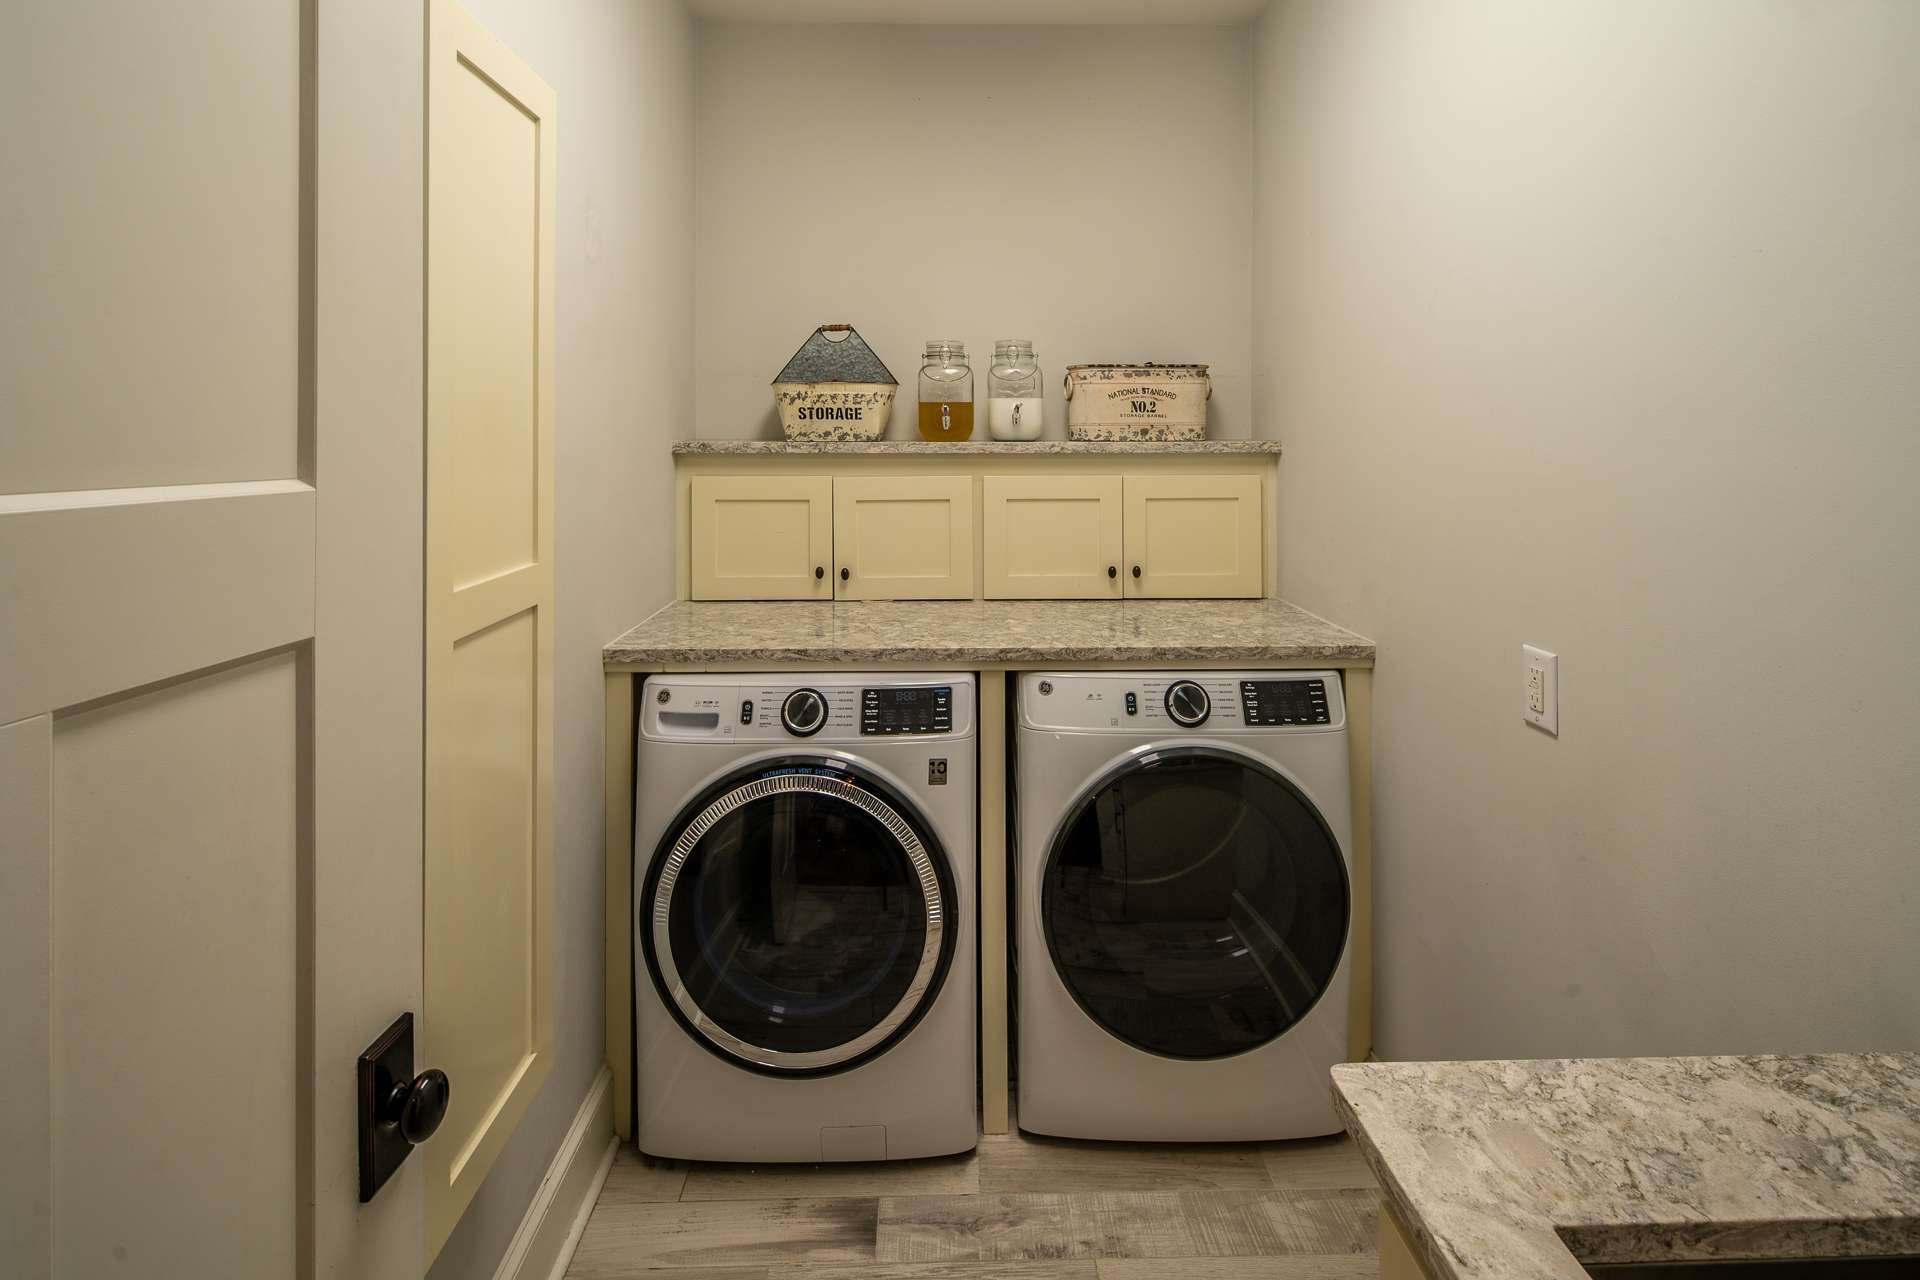 The laundry room is located on the main floor and provides storage cabinetry and a full sink.